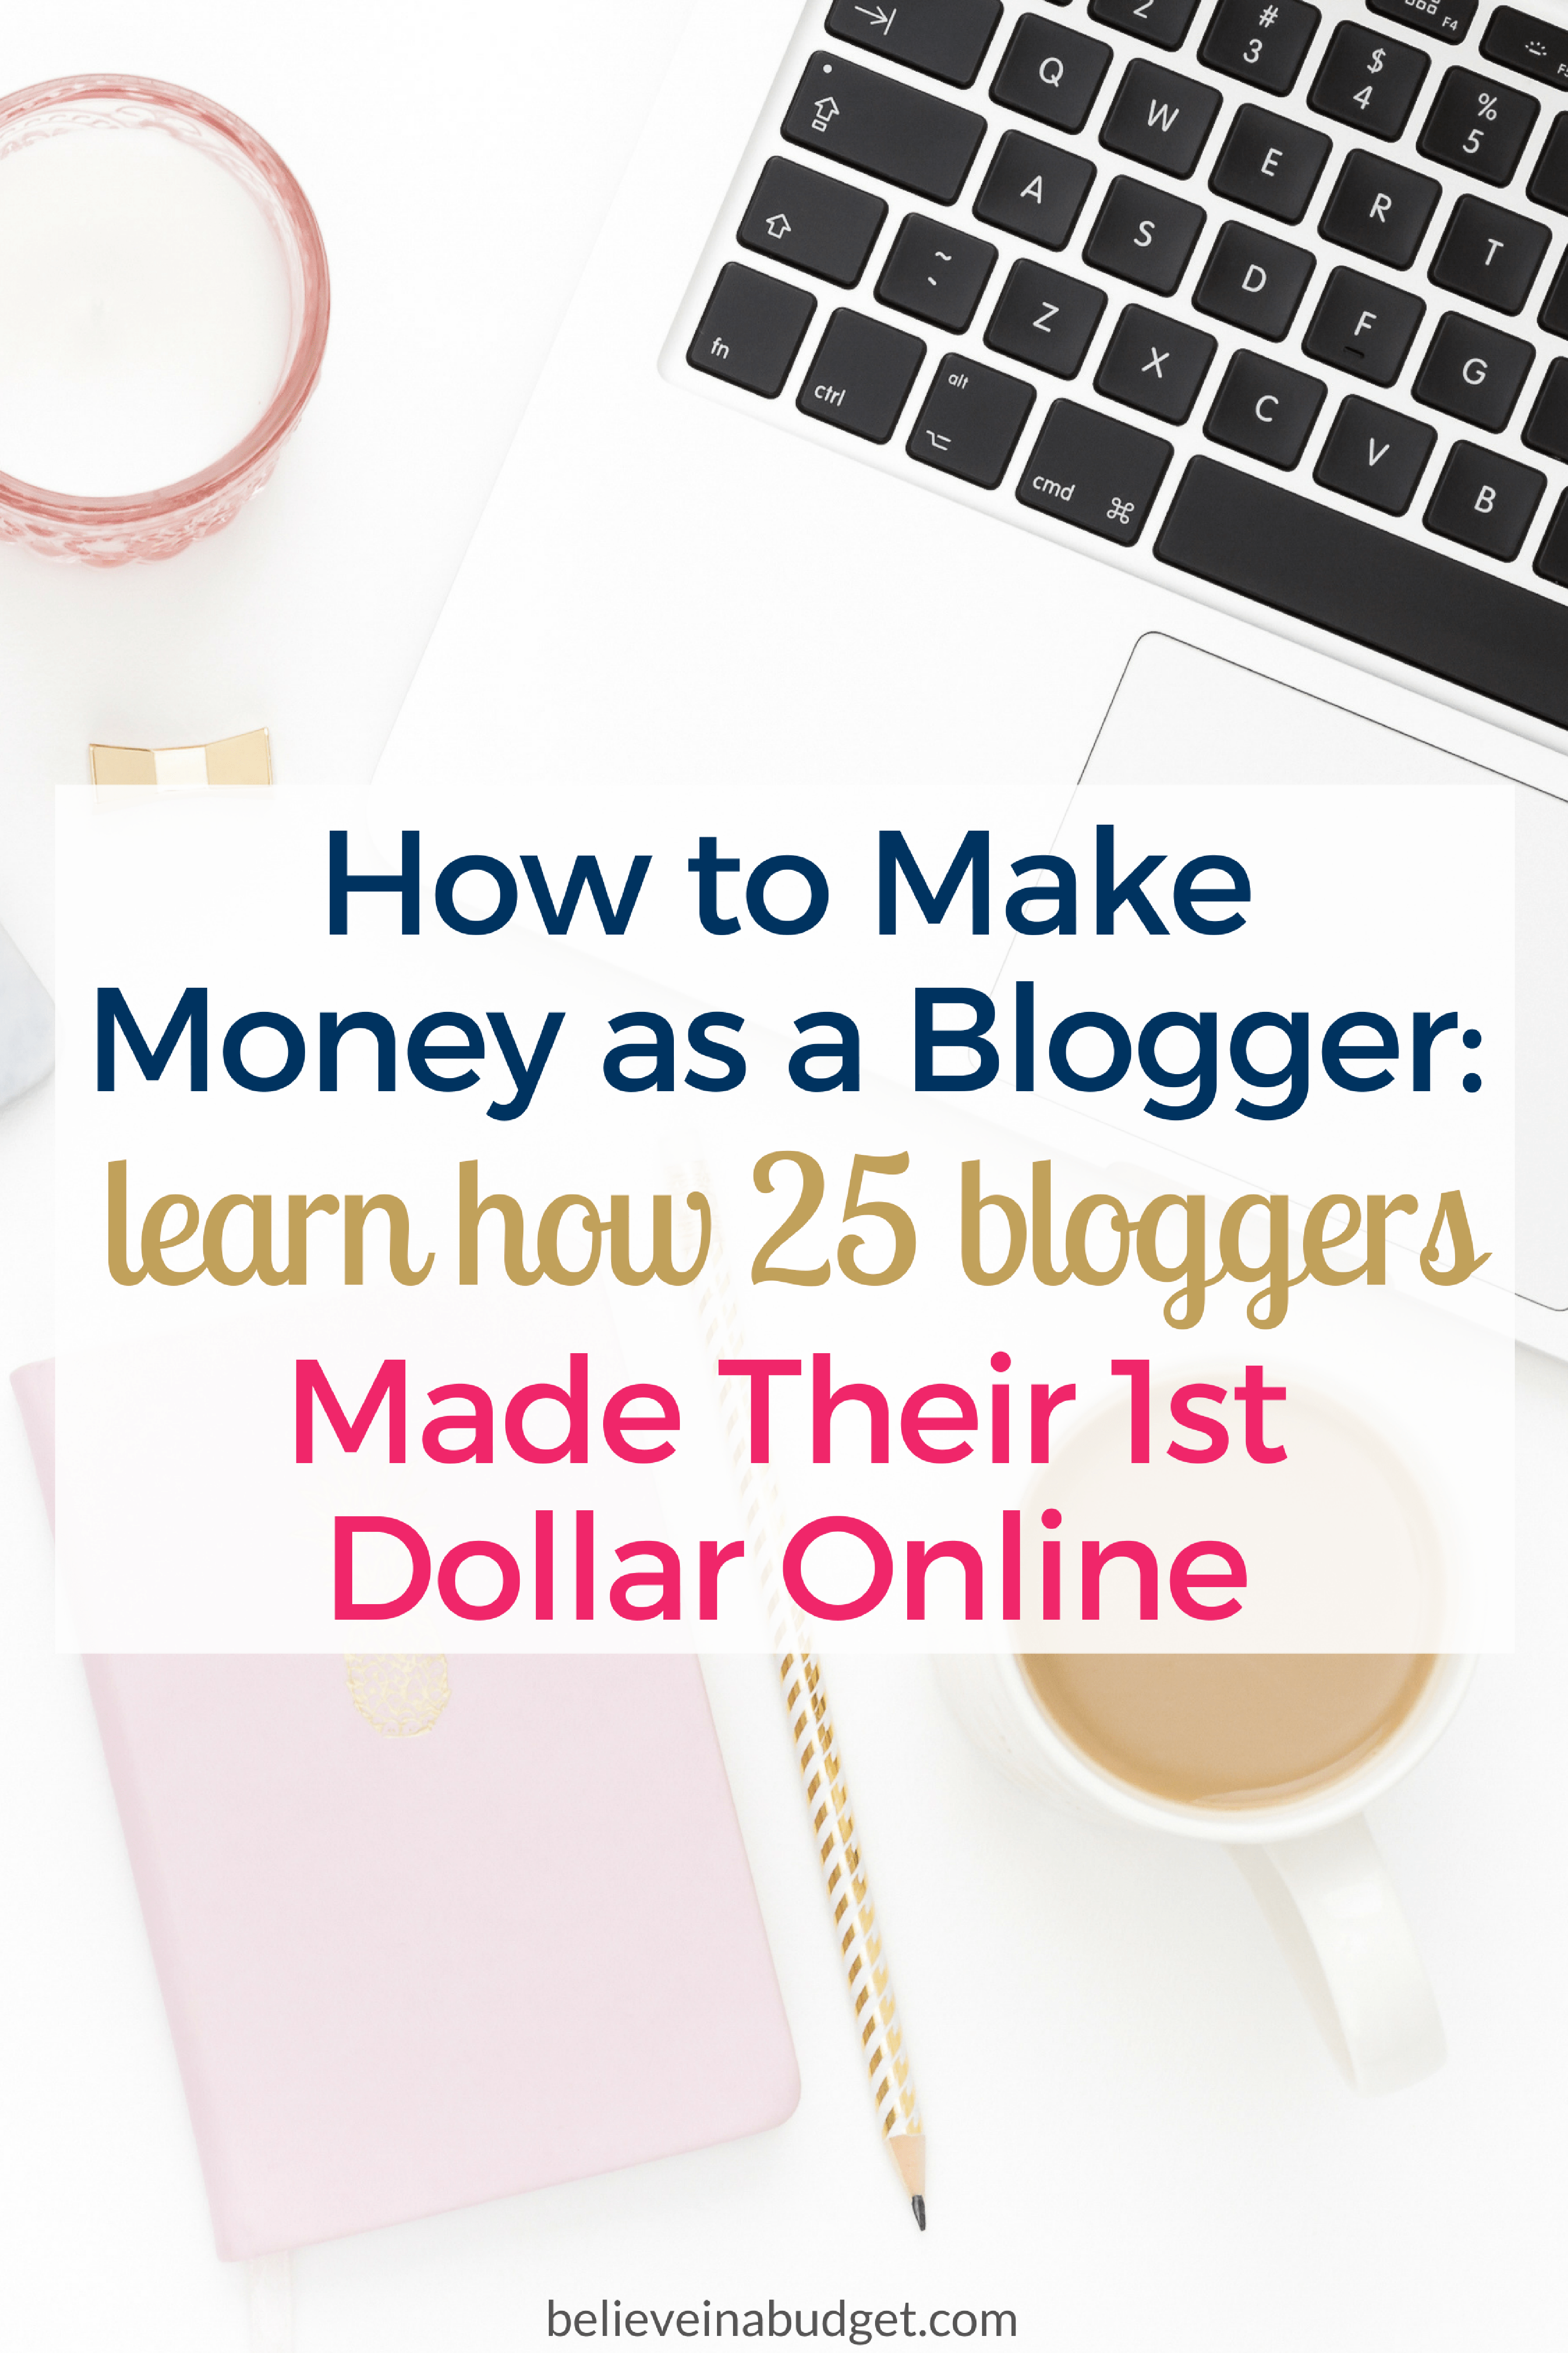 Want to learn how bloggers made their first paycheck online? These 25 bloggers are sharing exactly how they made their first online income. If you have been wanting to blog for profit, this post will help you get started making money online!